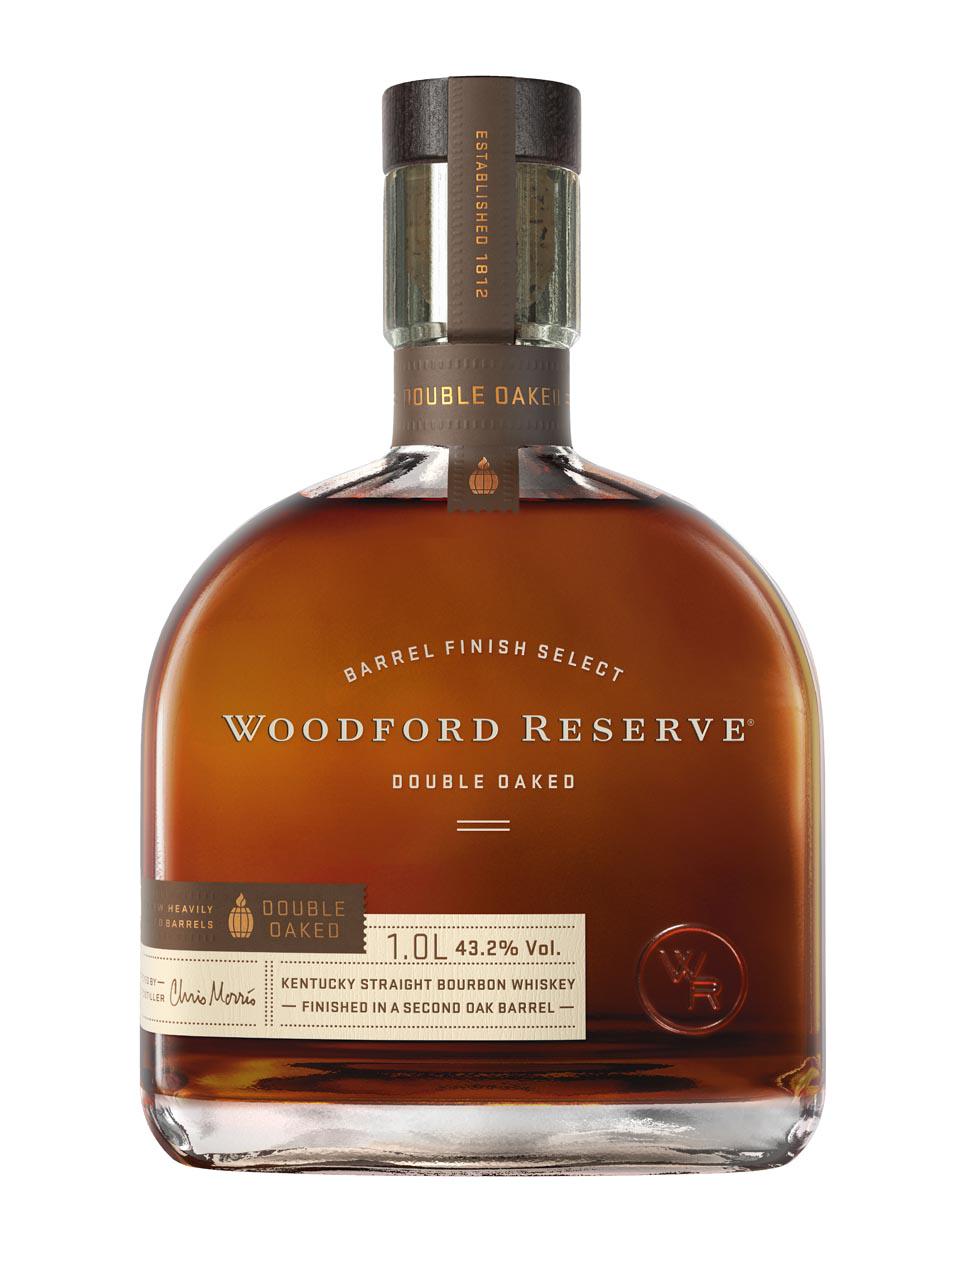 Woodford Reserve Double Kentucky Shopping Online Bourbon Straight Airport | 43.2% 1L* Oaked Whiskey Frankfurt